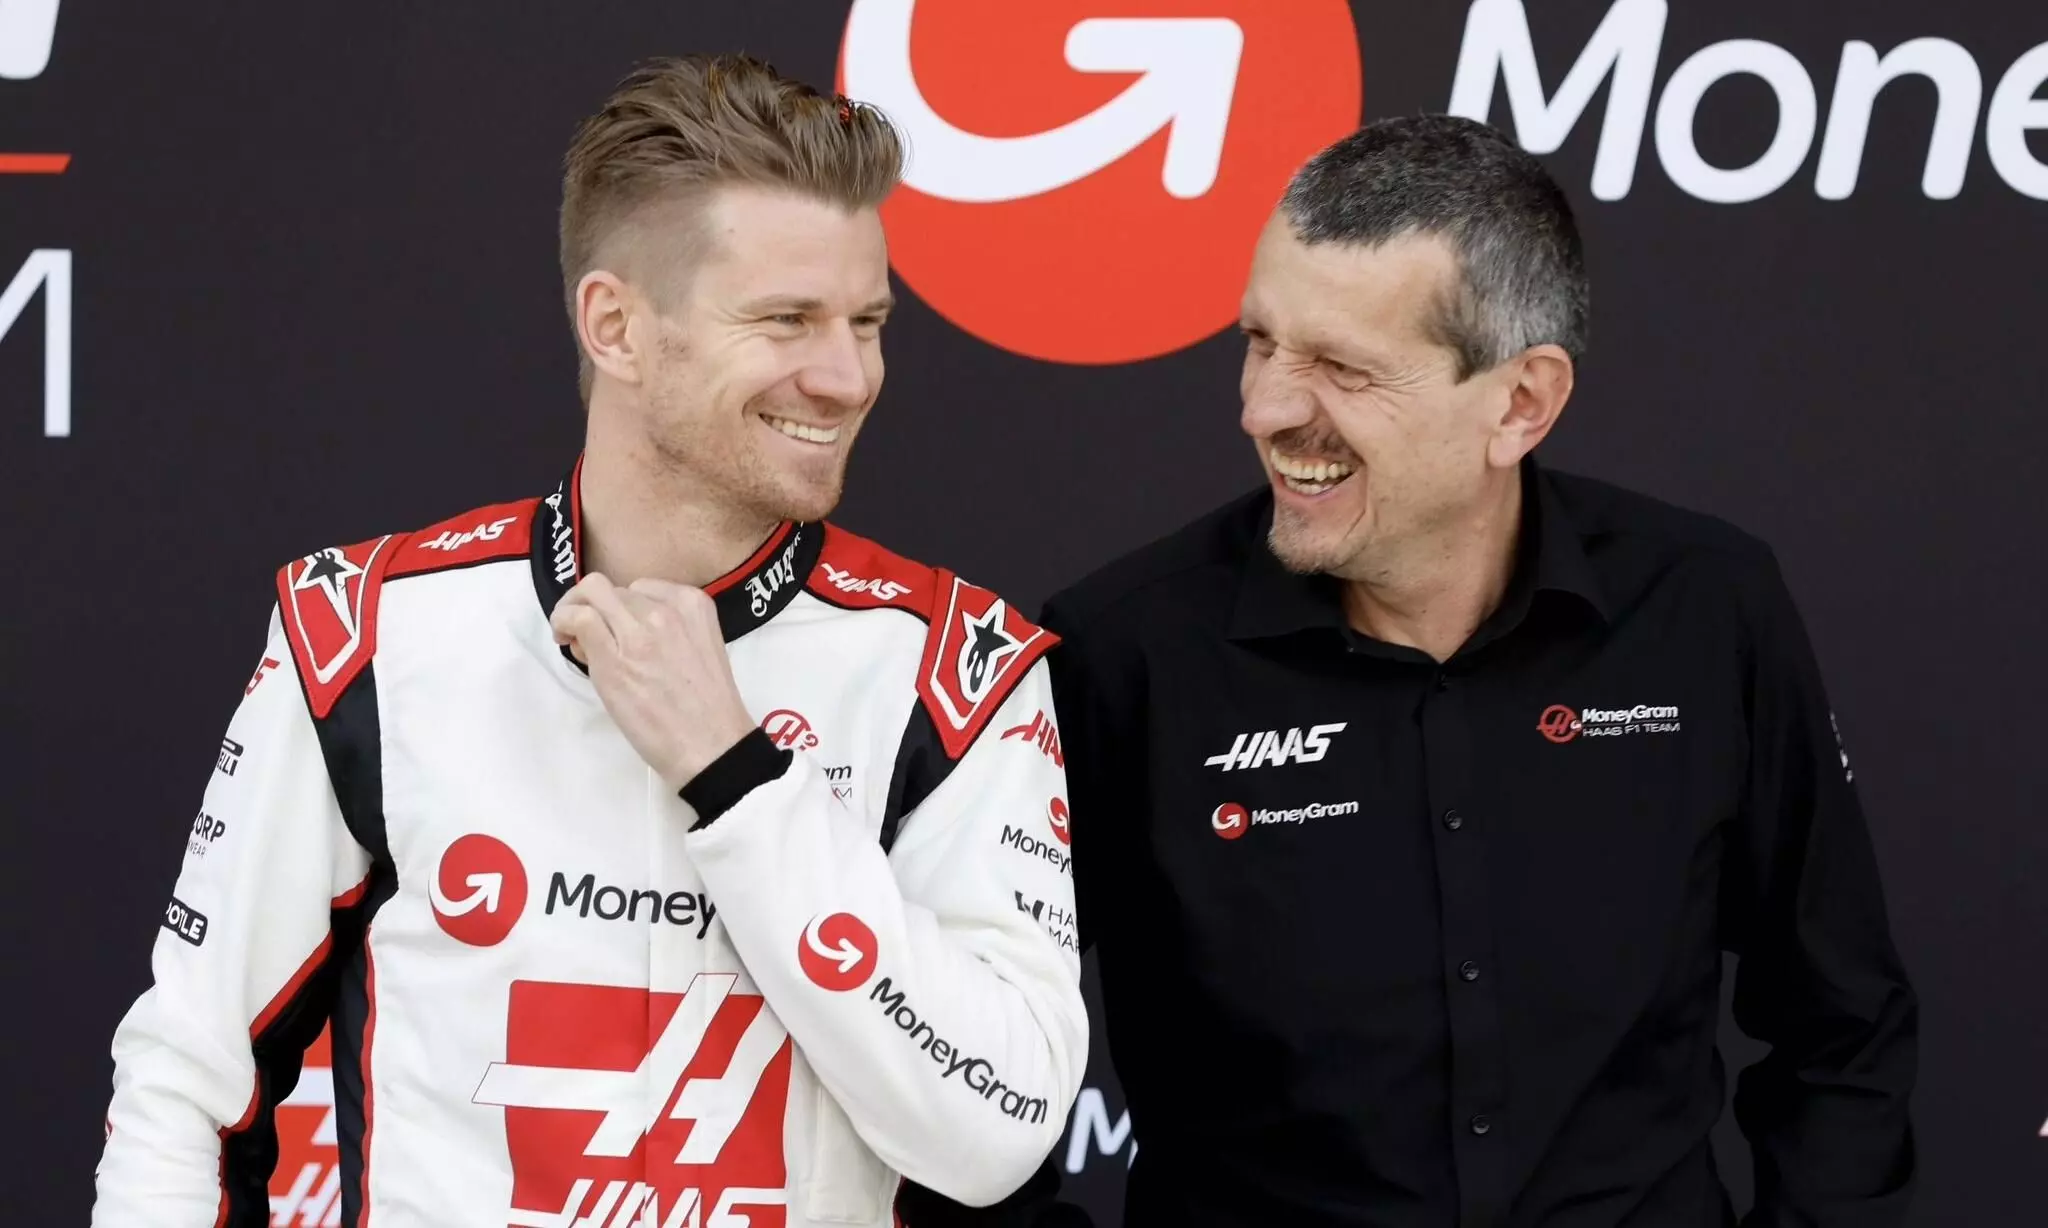 Nico Hülkenberg to leave Haas for Sauber next year ahead of Audis arrival in F1